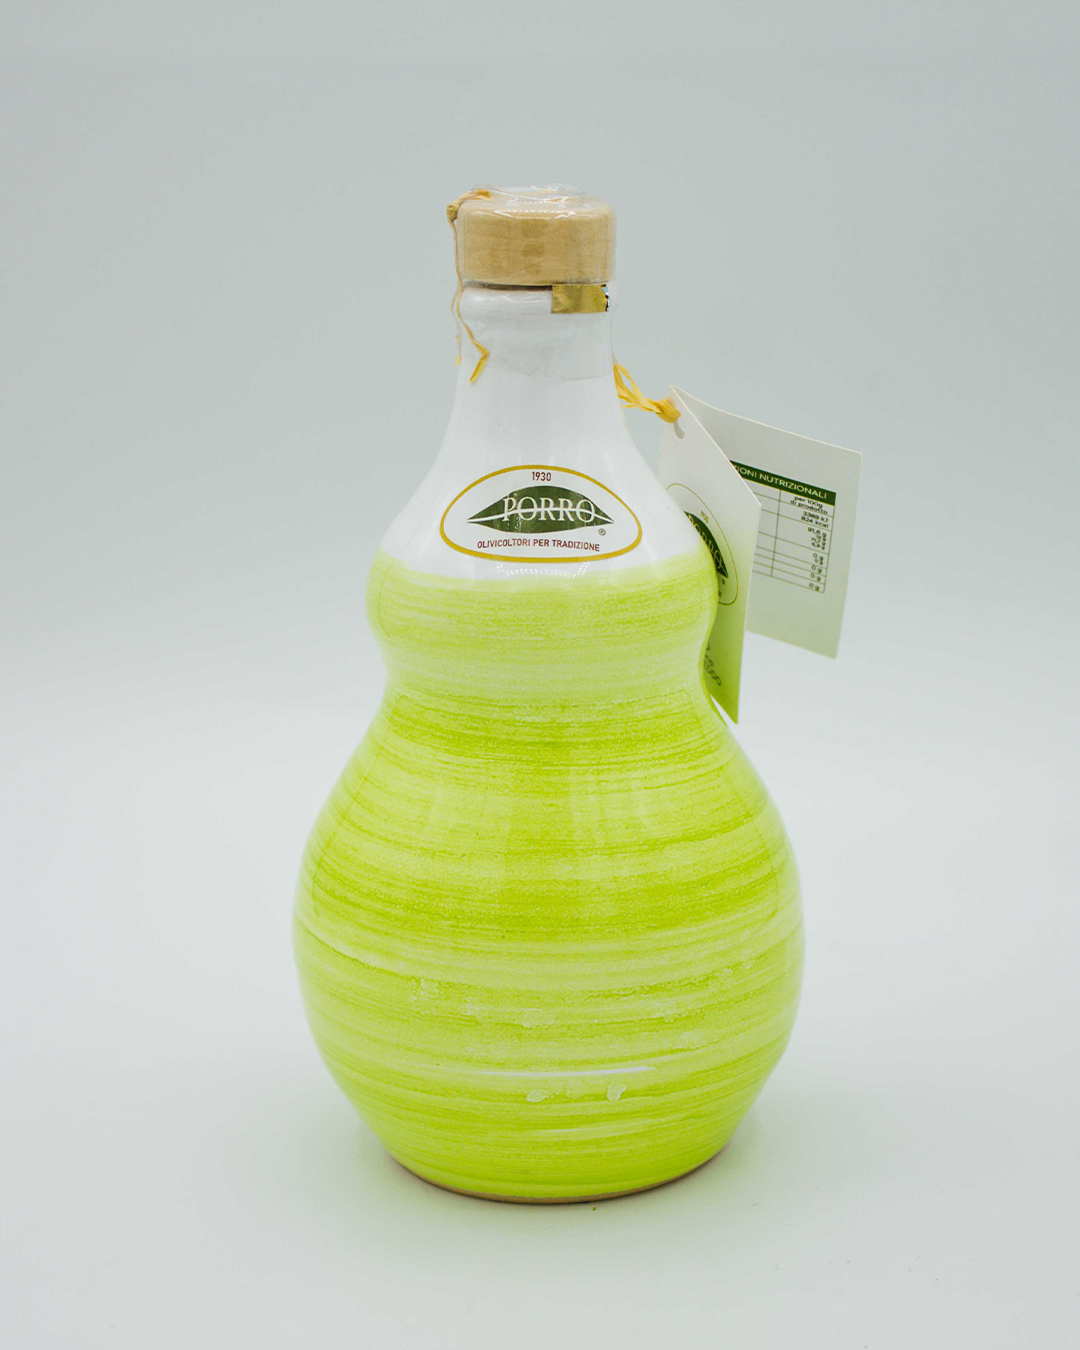 Orcetto Lime delux 400ml